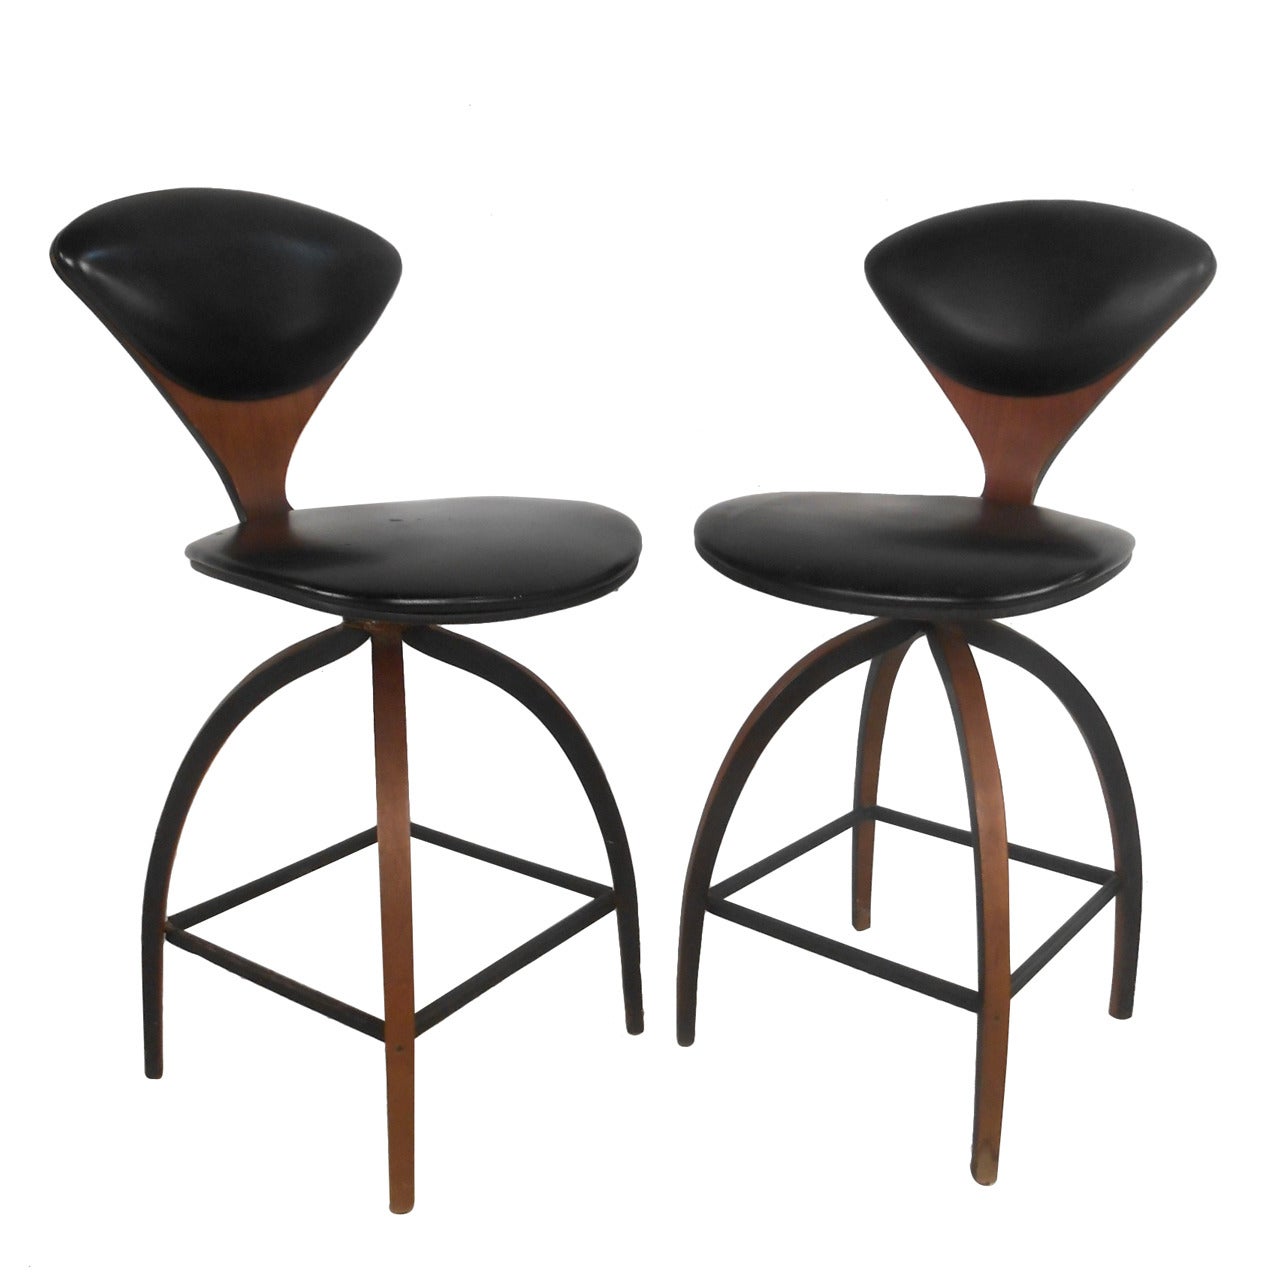 Pair of Mid-Century Modern Plycraft Bar Stools by Norman Cherner